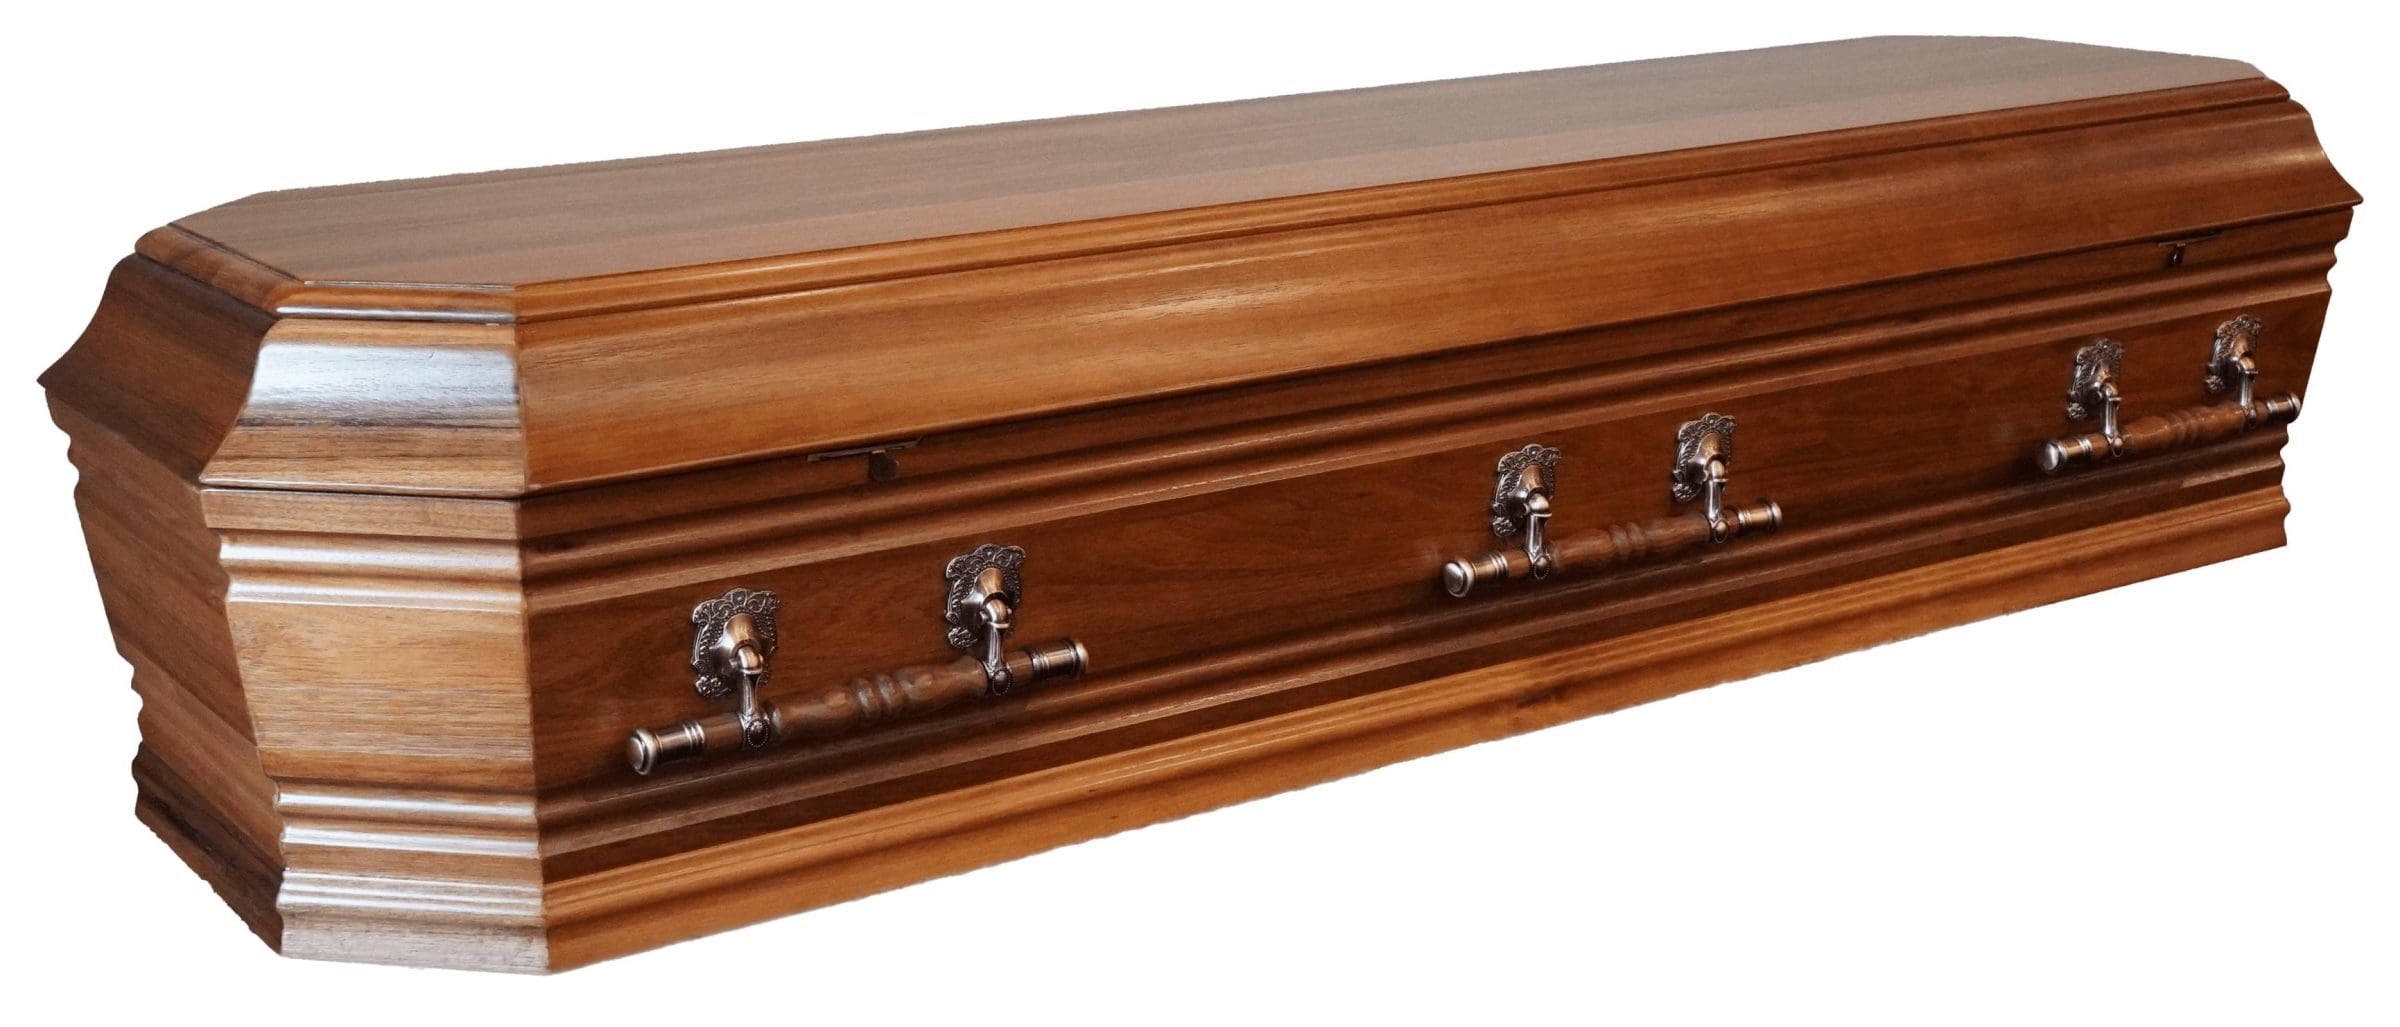 Woodville Solid Tasmanian Blackwood Coffin by Fry Bros Funerals in Maitland